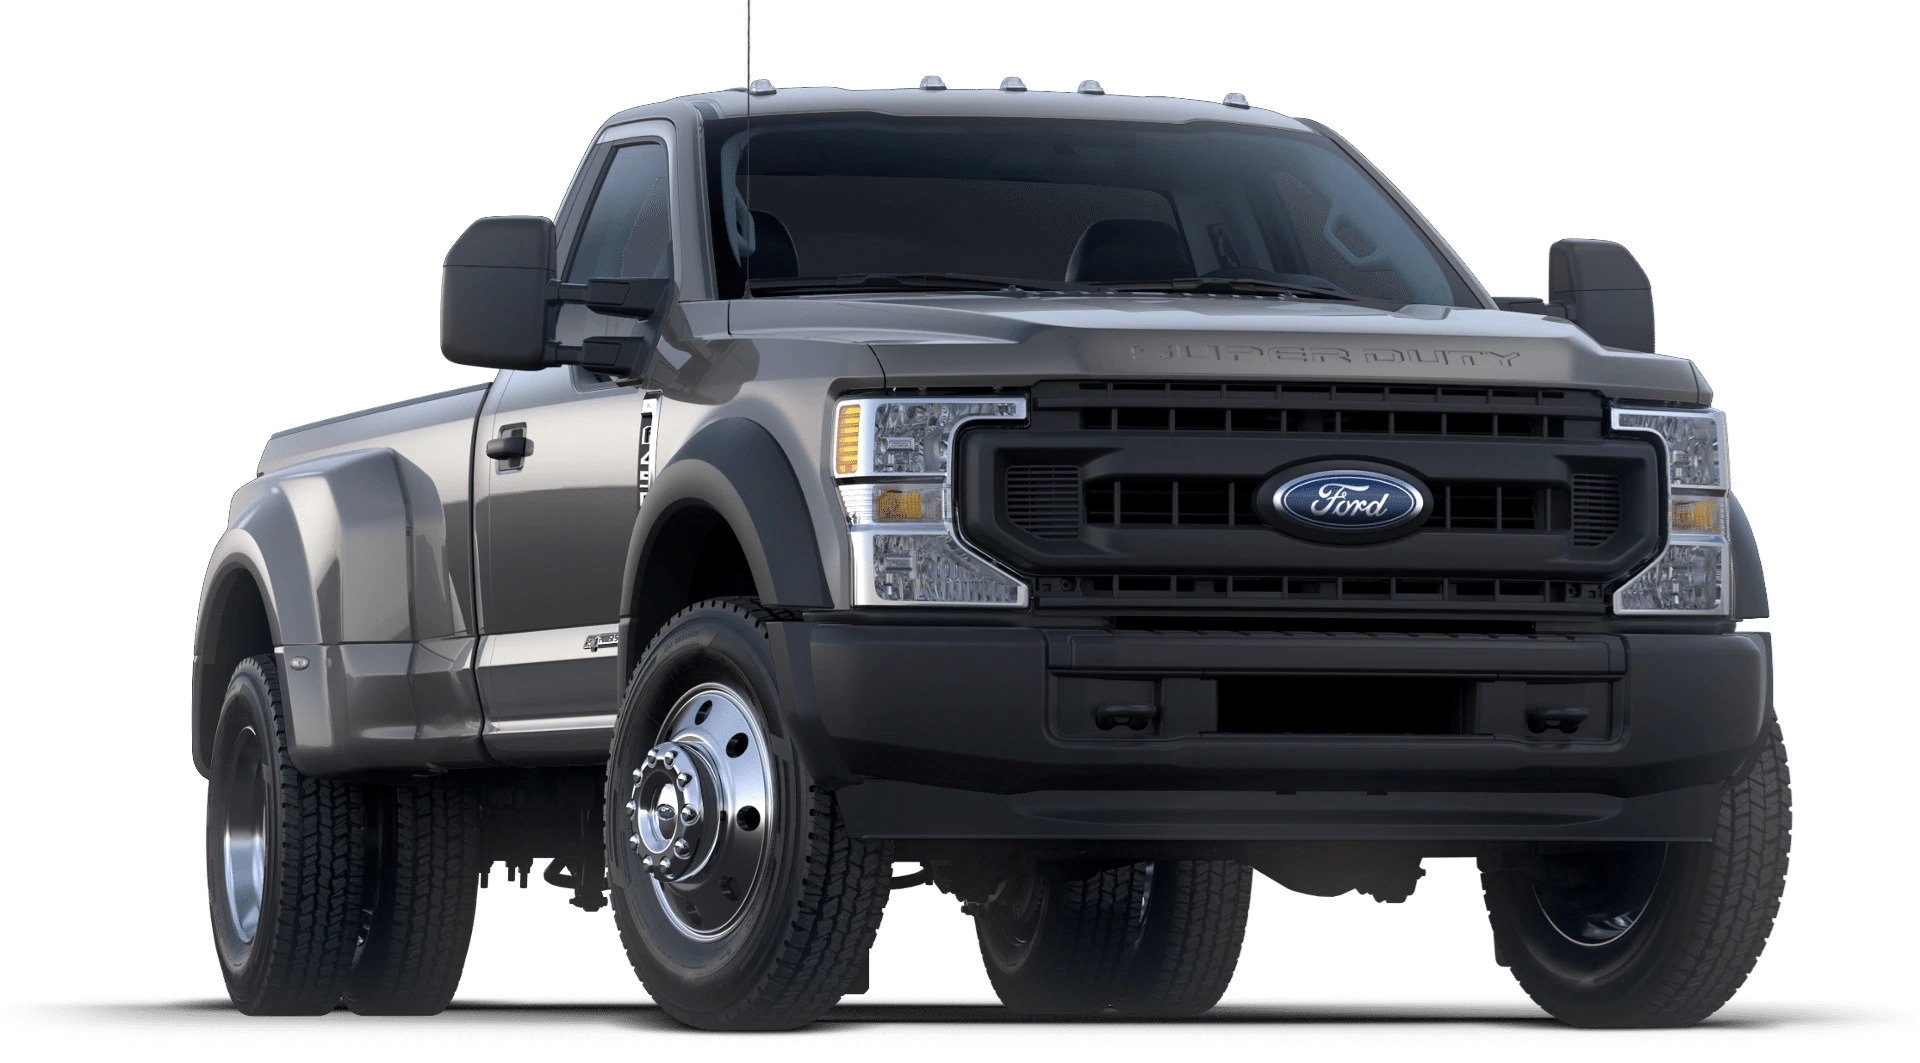 2021 Ford F-450 Super Duty Platinum Full Specs, Features and Price | CarBuzz